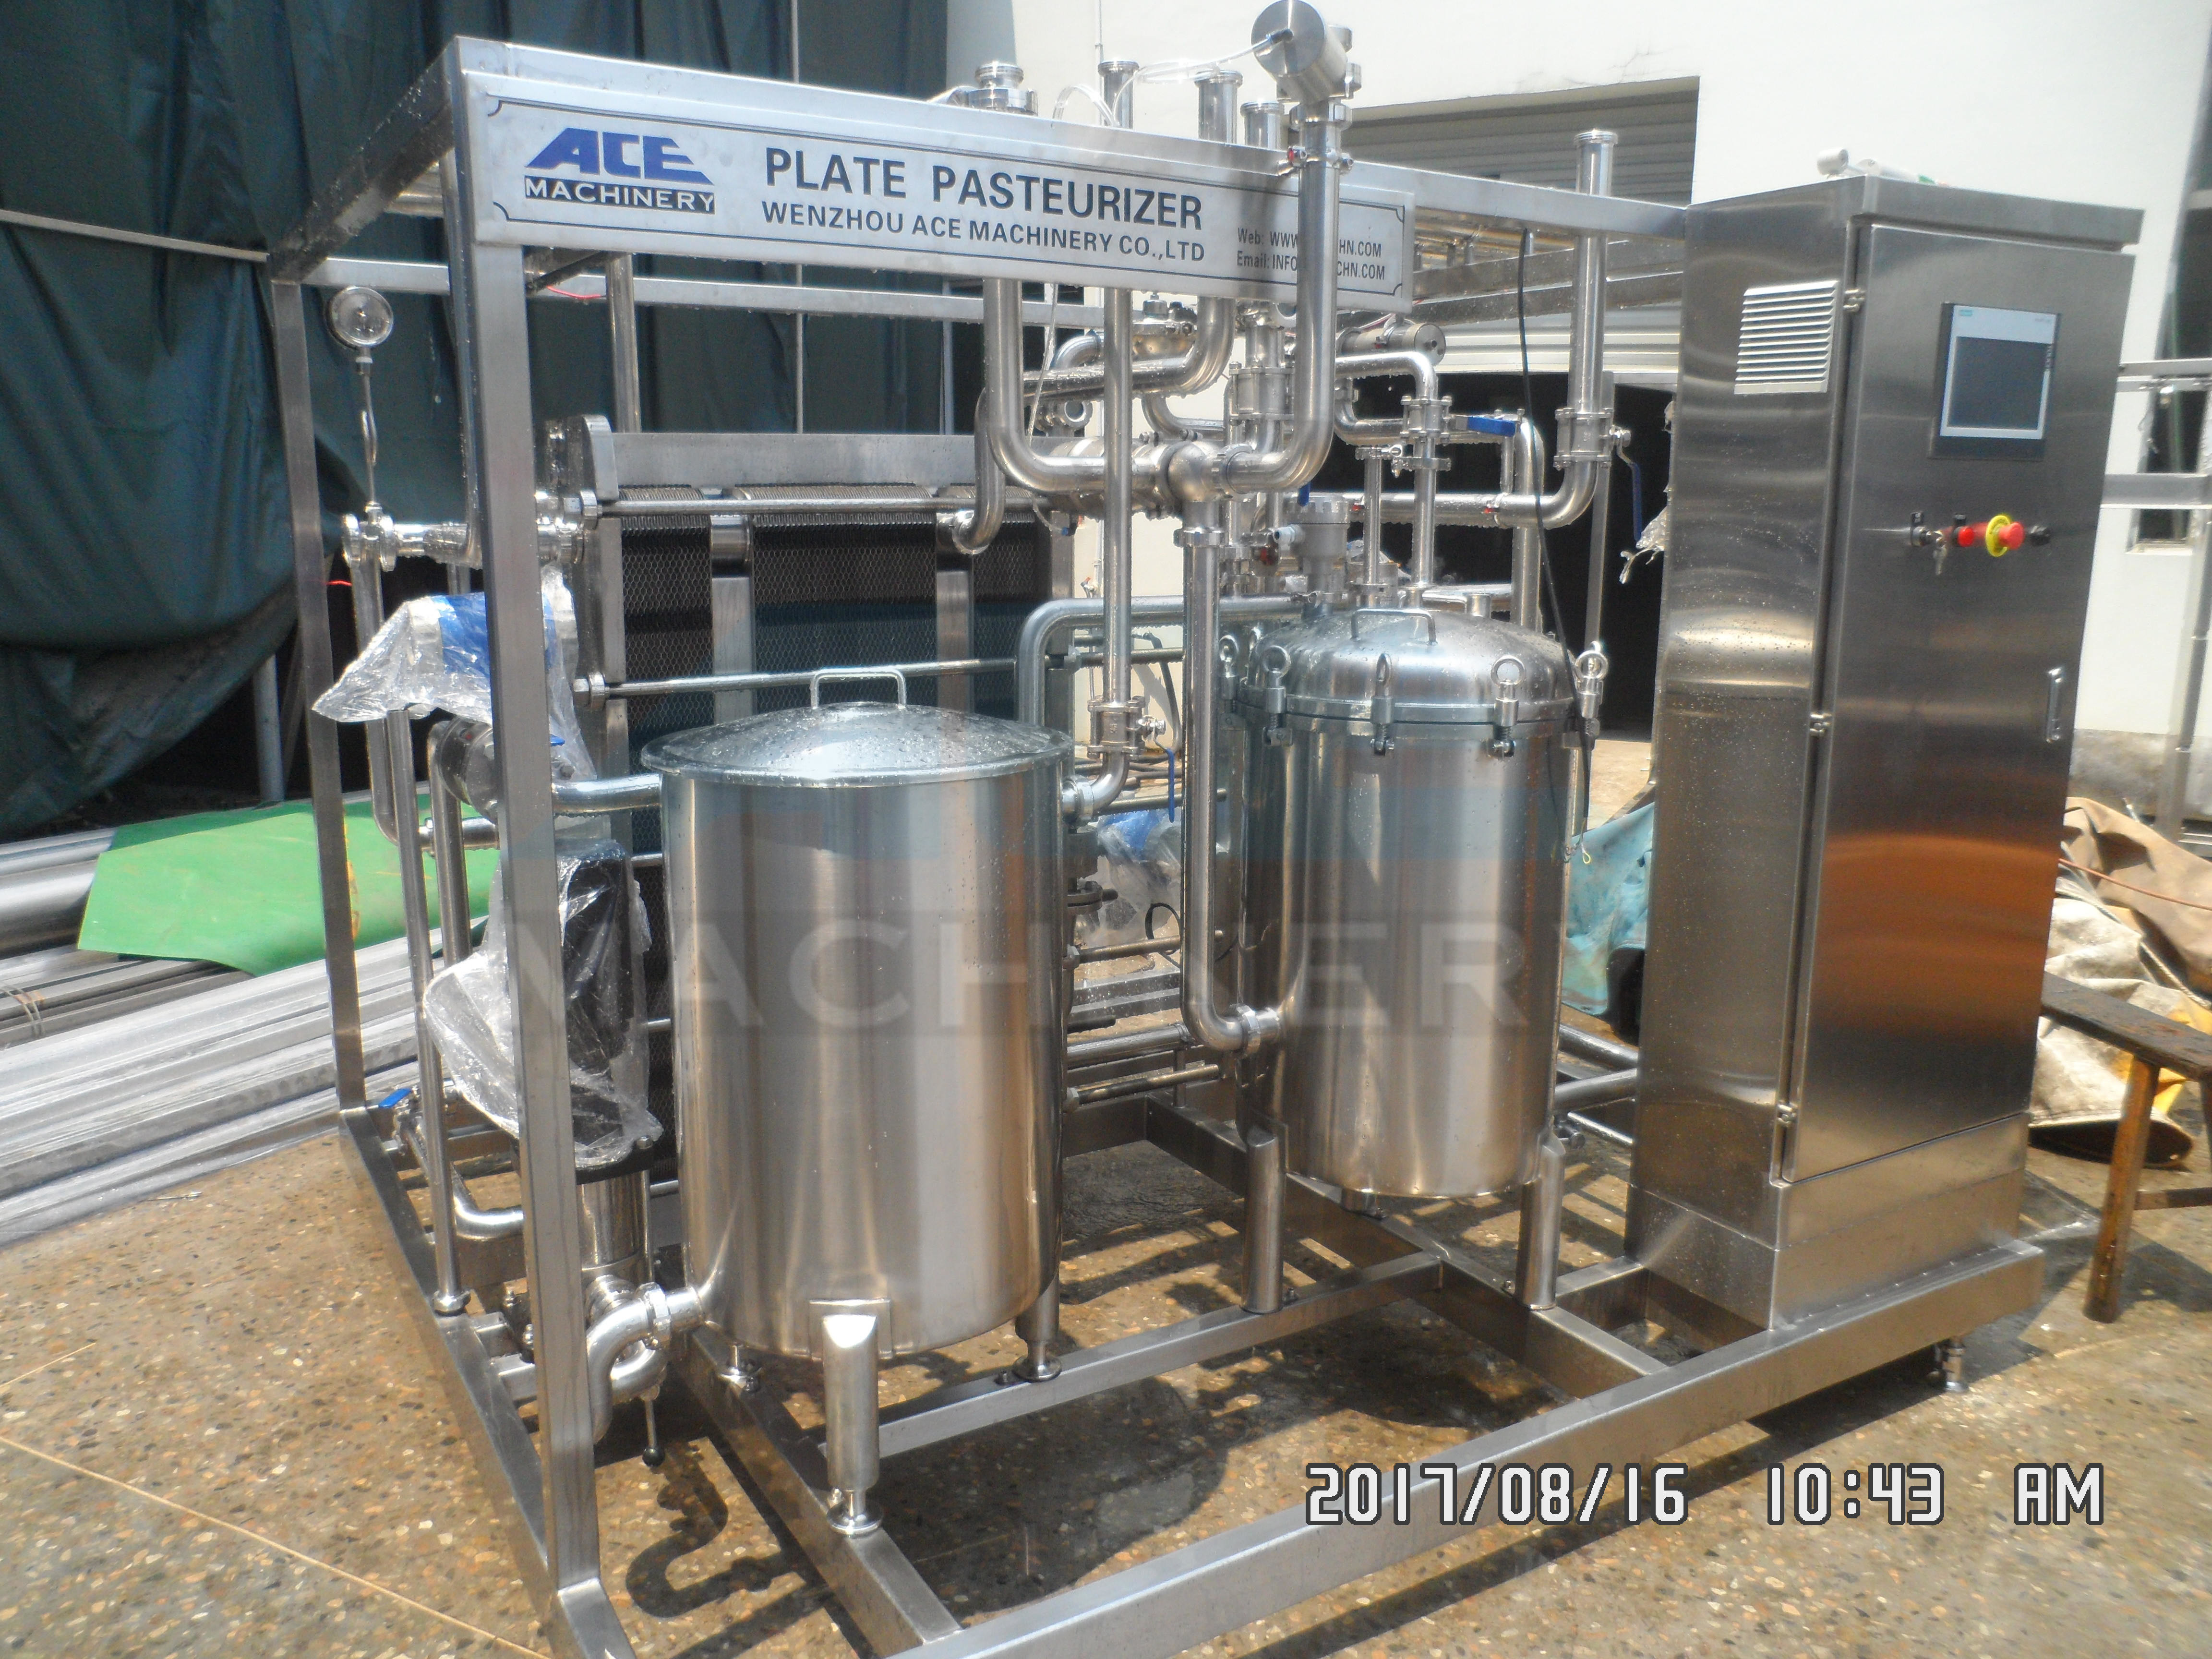 Wholesale Steam Canned Food/ Bag Packaged Food Sterilizer CE Approved Tubular UHT Steam Milk Sterilizer from china suppliers